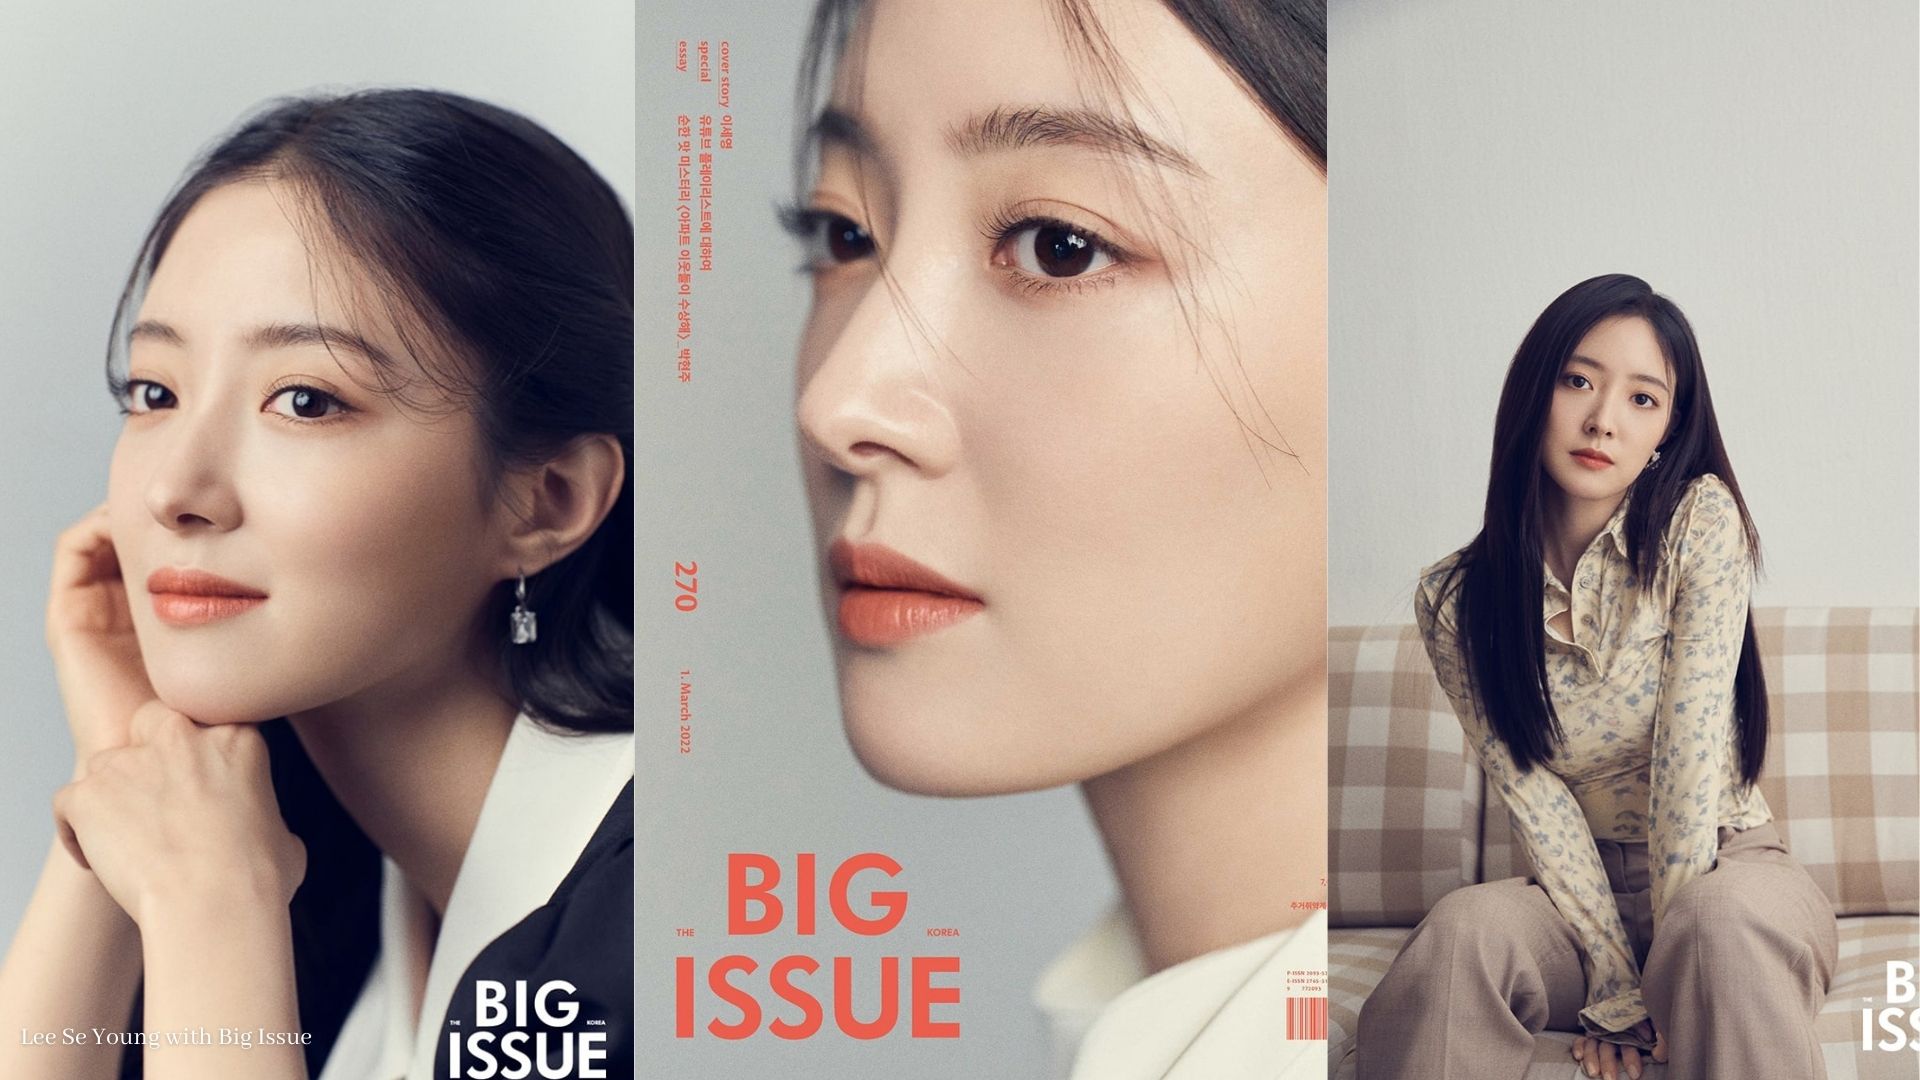 Lee Se Young About Her Character in “The Red Sleeve” with Big Issue Magazine